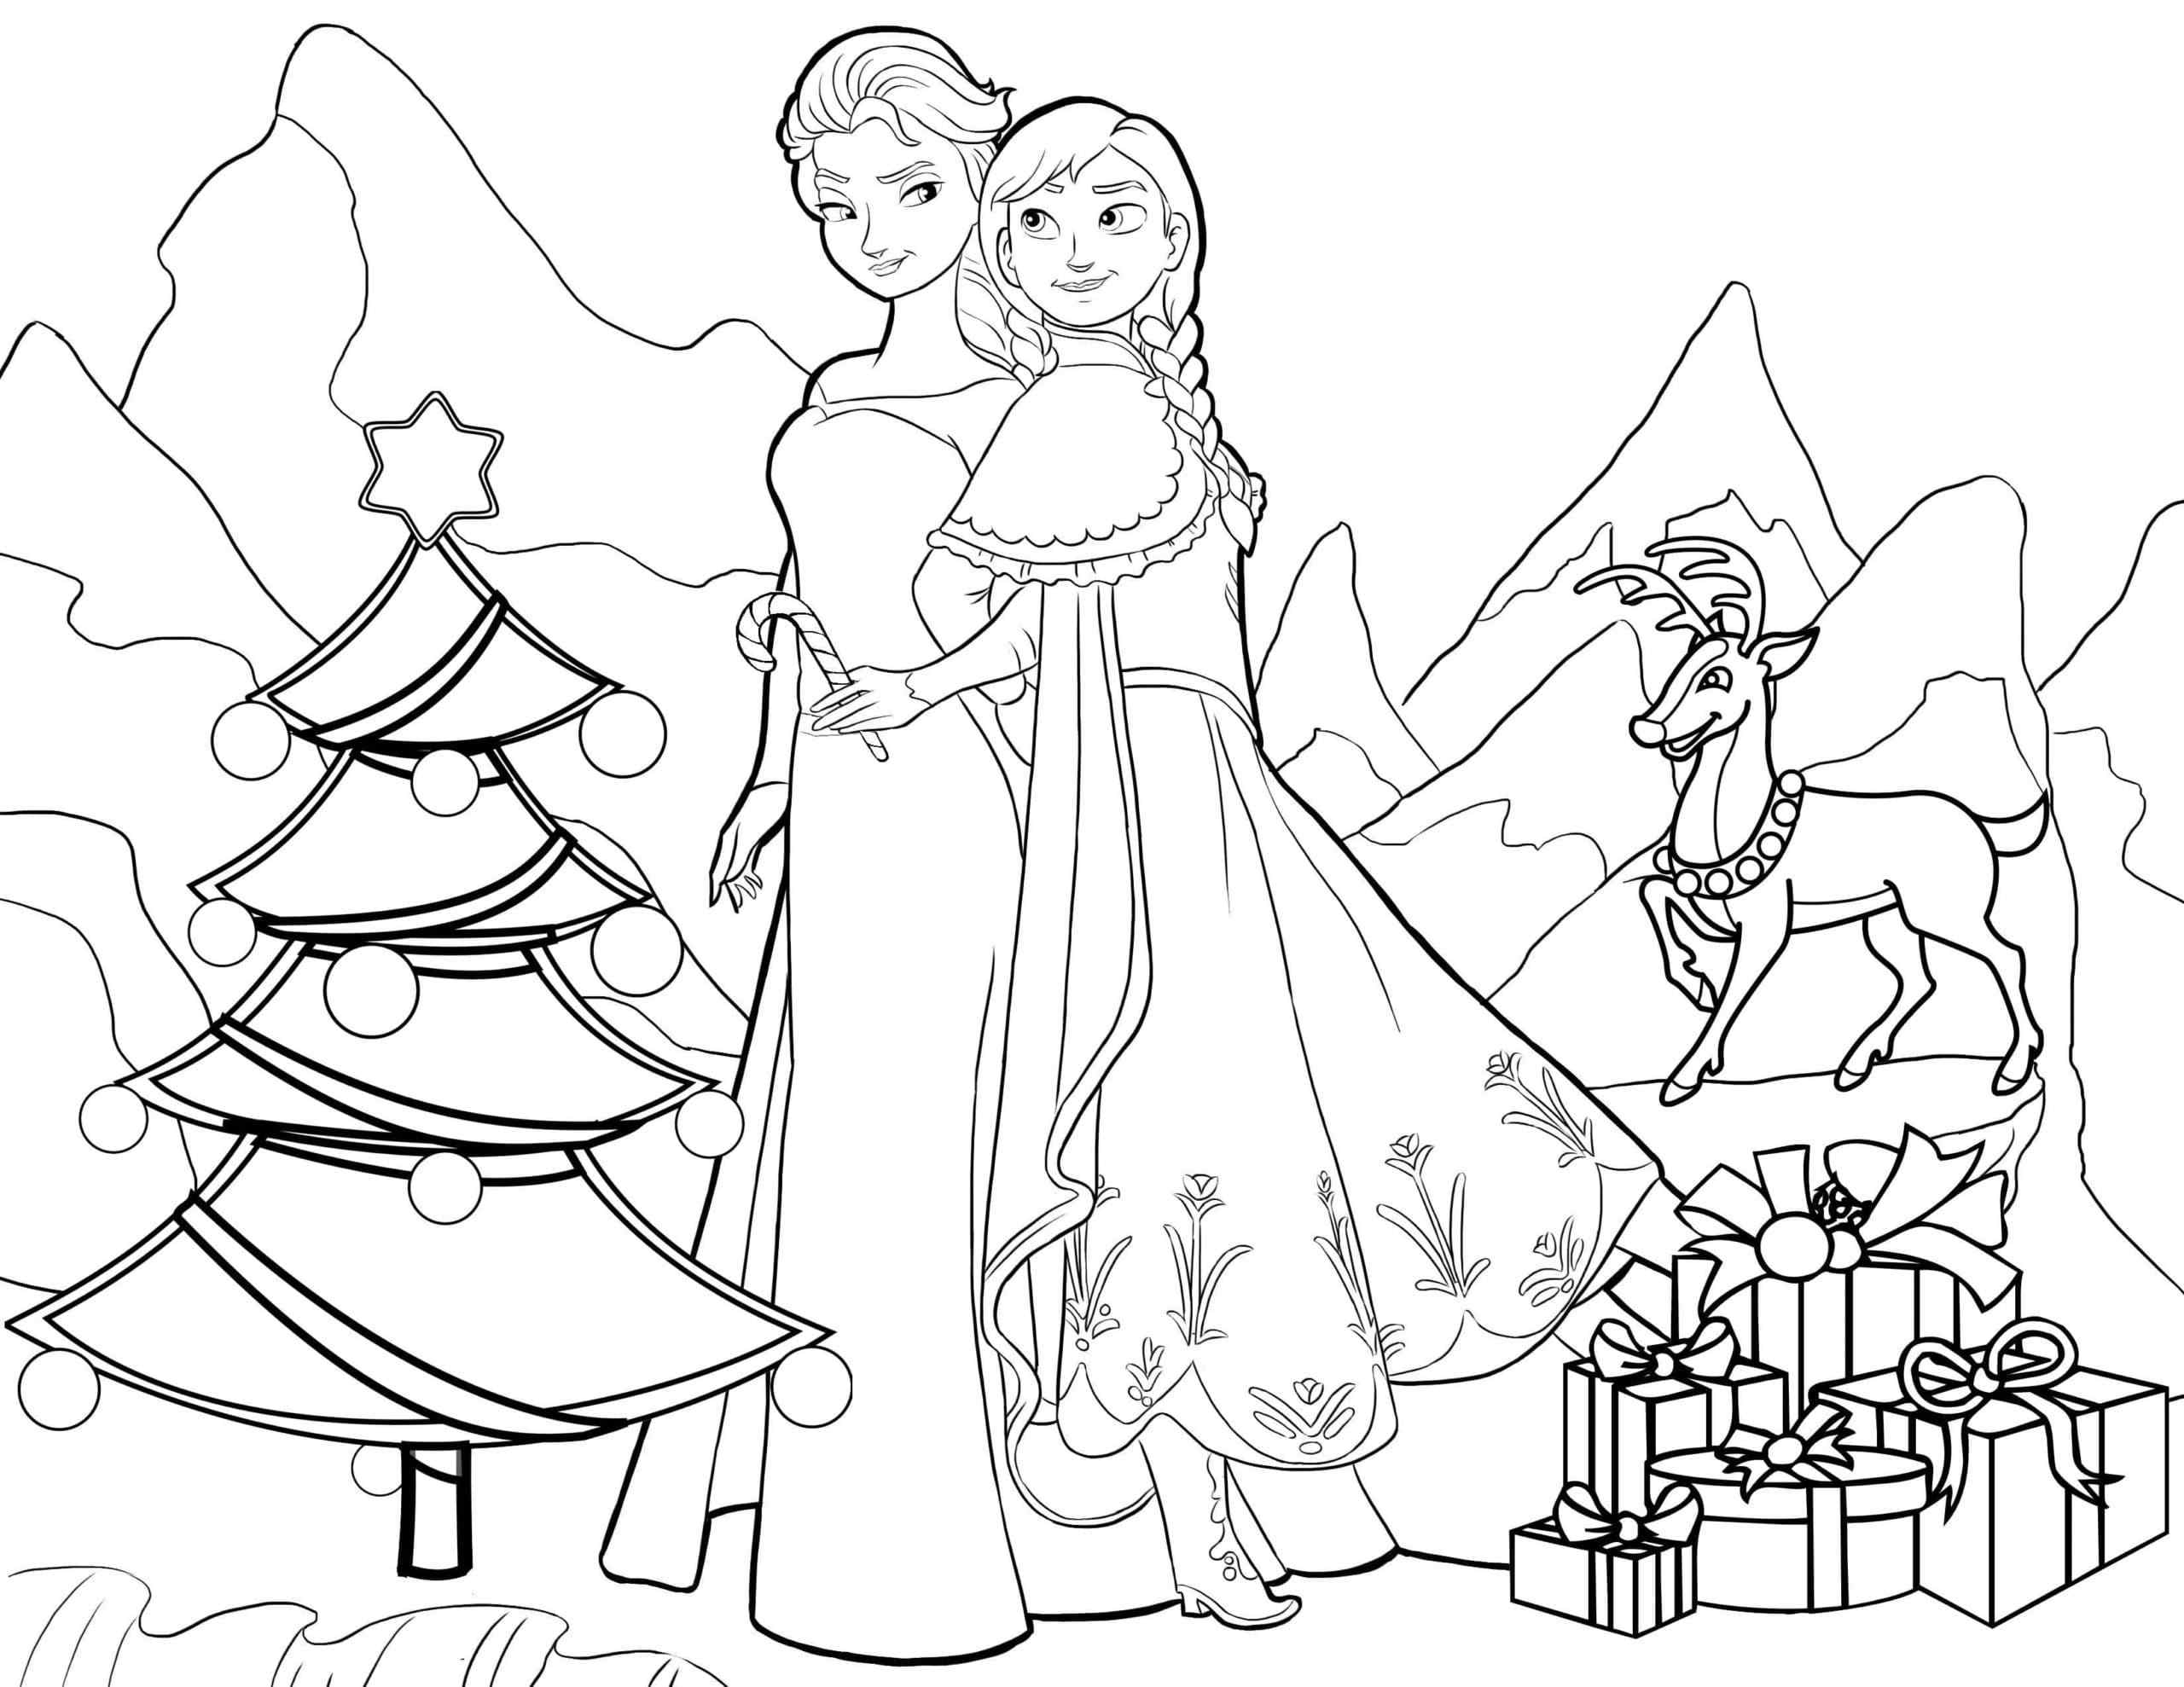 Anna And Elsa In A Snowy Christmas Tale